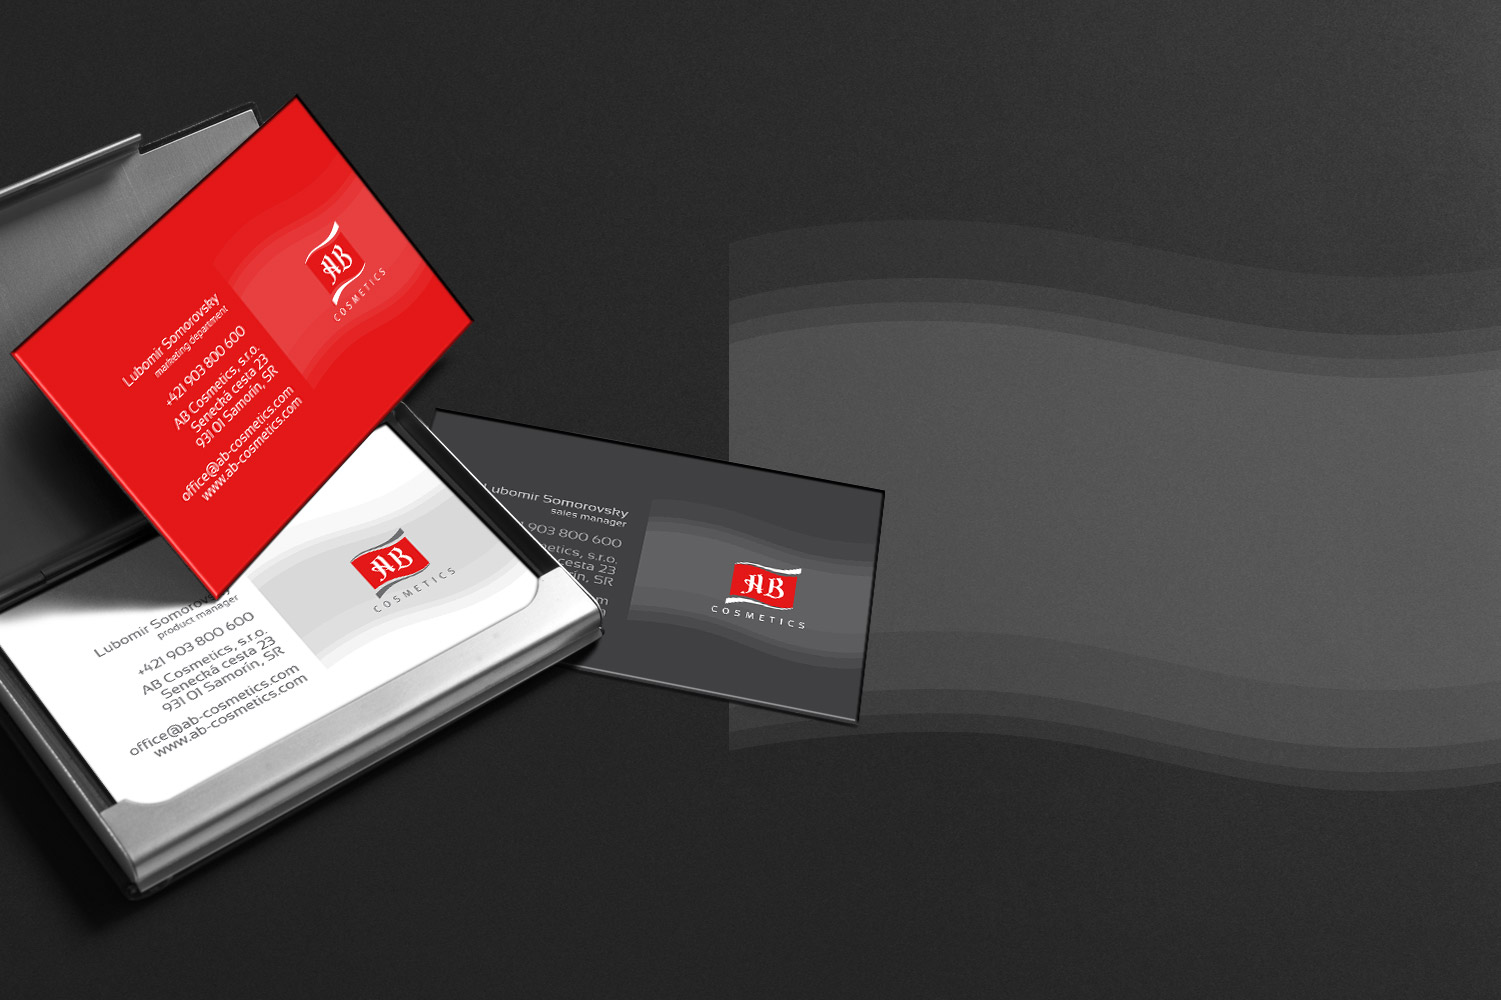 AB Cosmetics, business card concept image